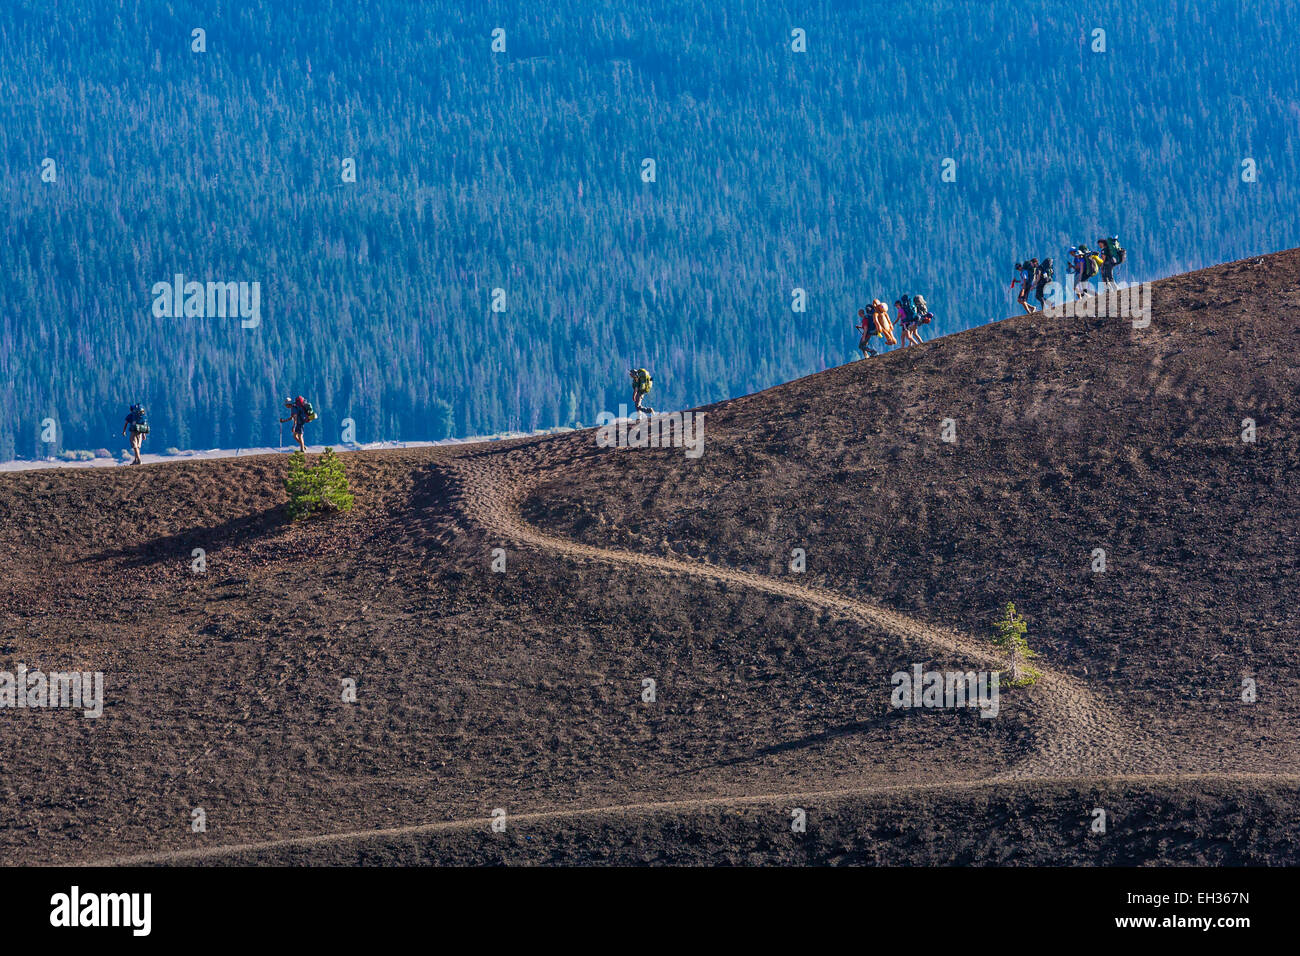 Geology students backpacking along the Cinder Cone Trail in Lassen Volcanic National Park, California, USA Stock Photo